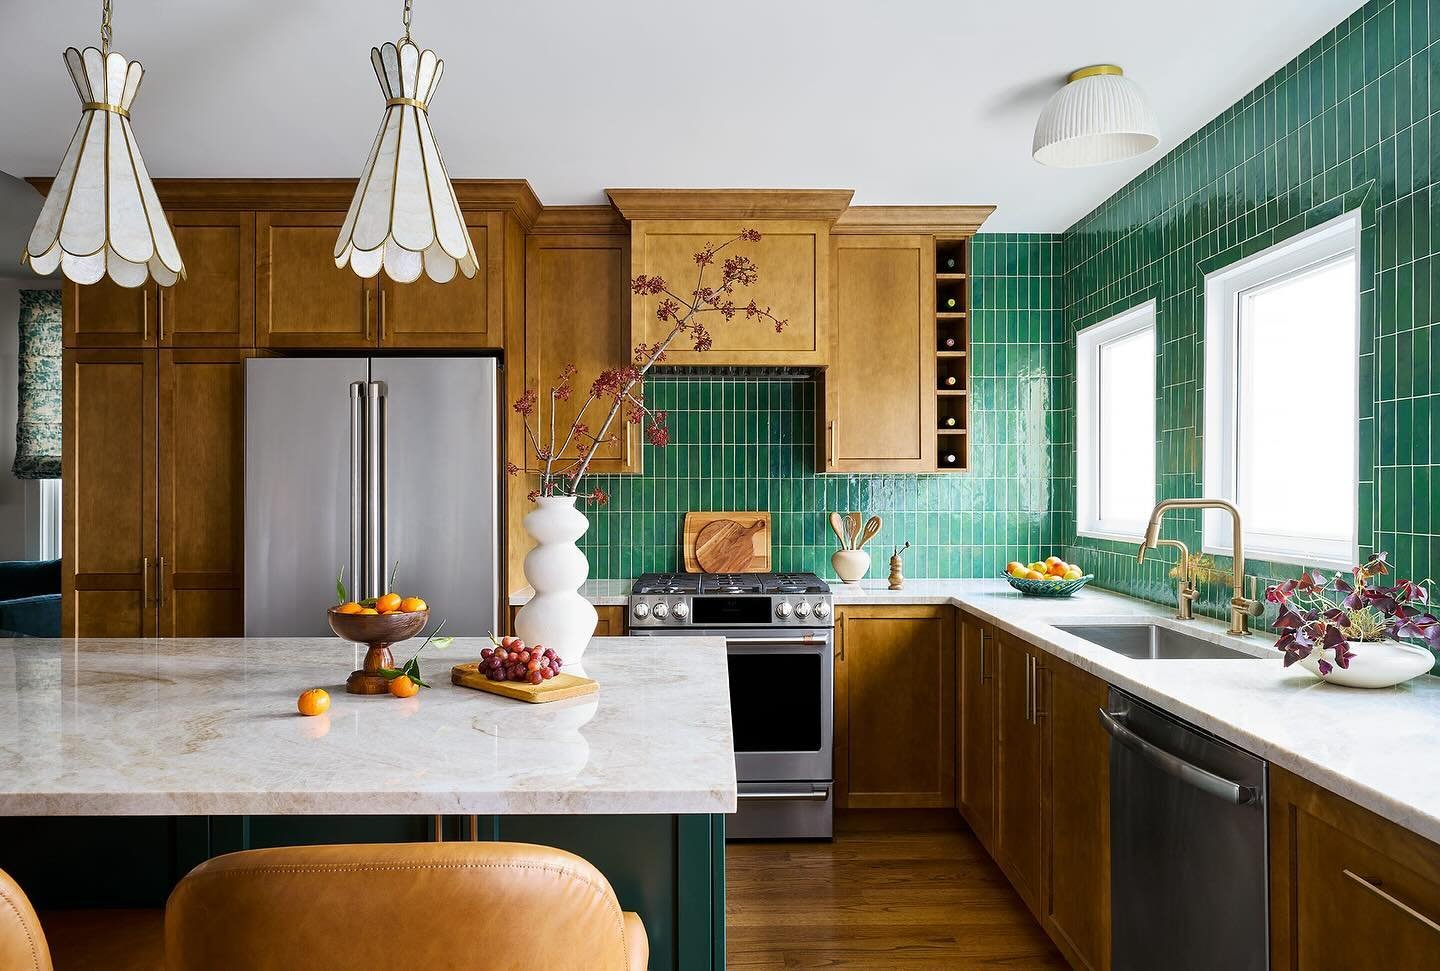 Here&rsquo;s your reminder to cook for your mom and then CLEAN THE KITCHEN. Wishing you all a weekend filled with clear counters, moms or not. And heres your daily reminder that mixing textures and colors is the key to making it all work together, an